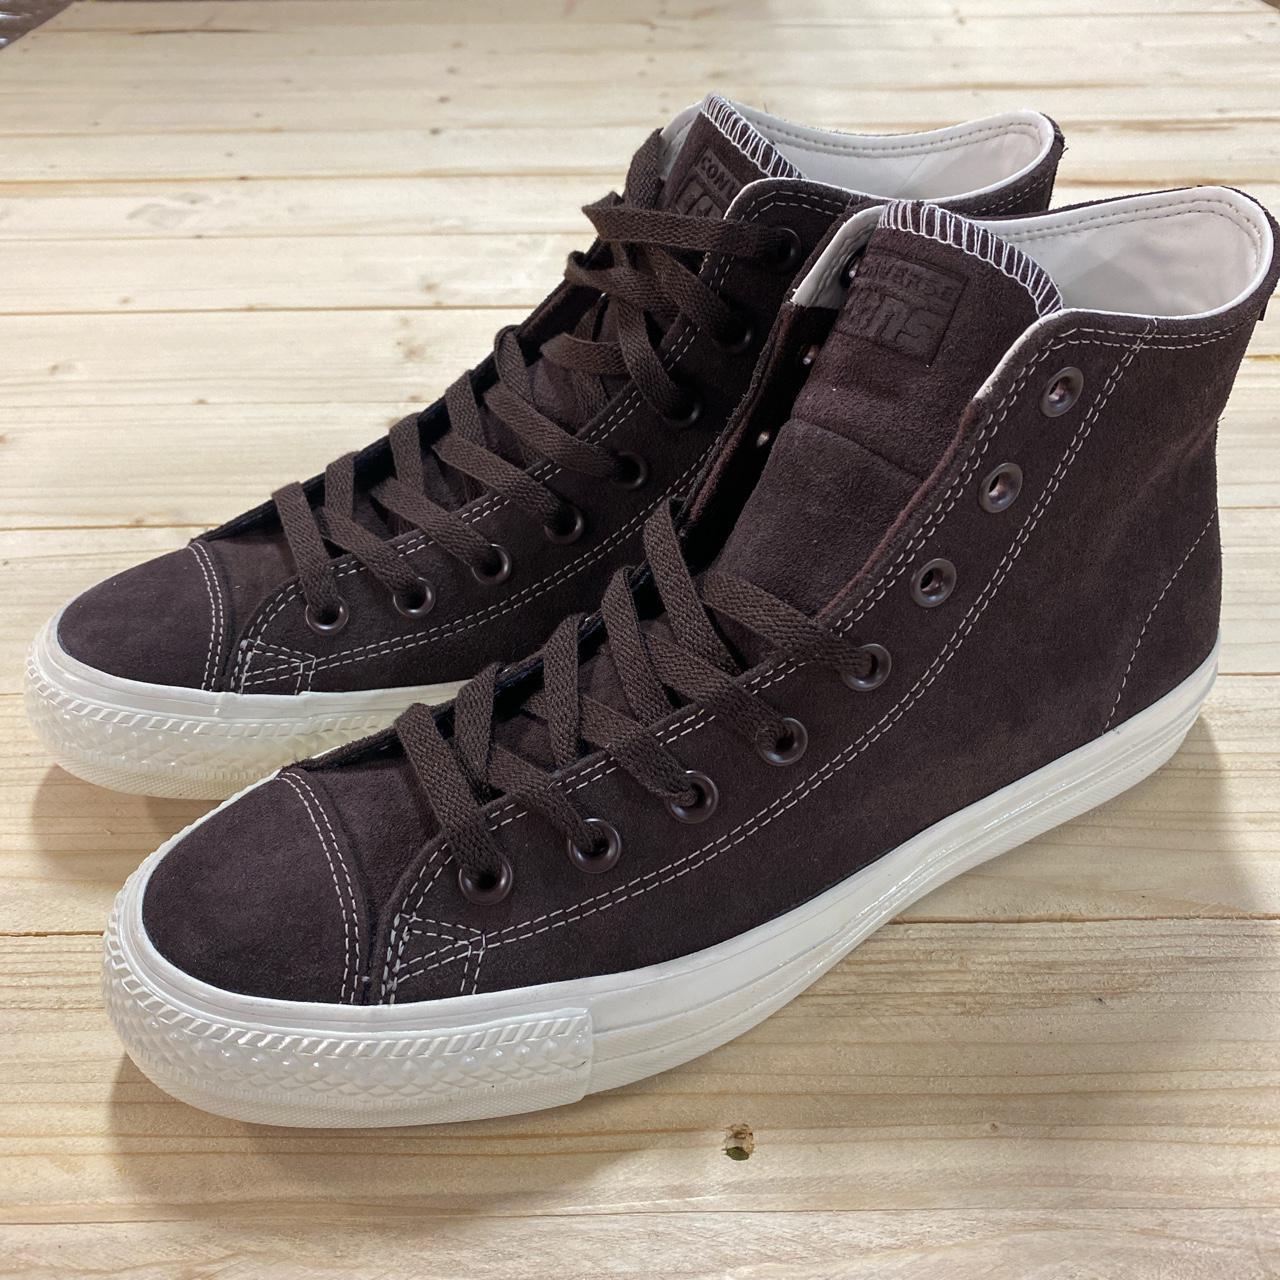 Converse Men's Brown and White Trainers (2)